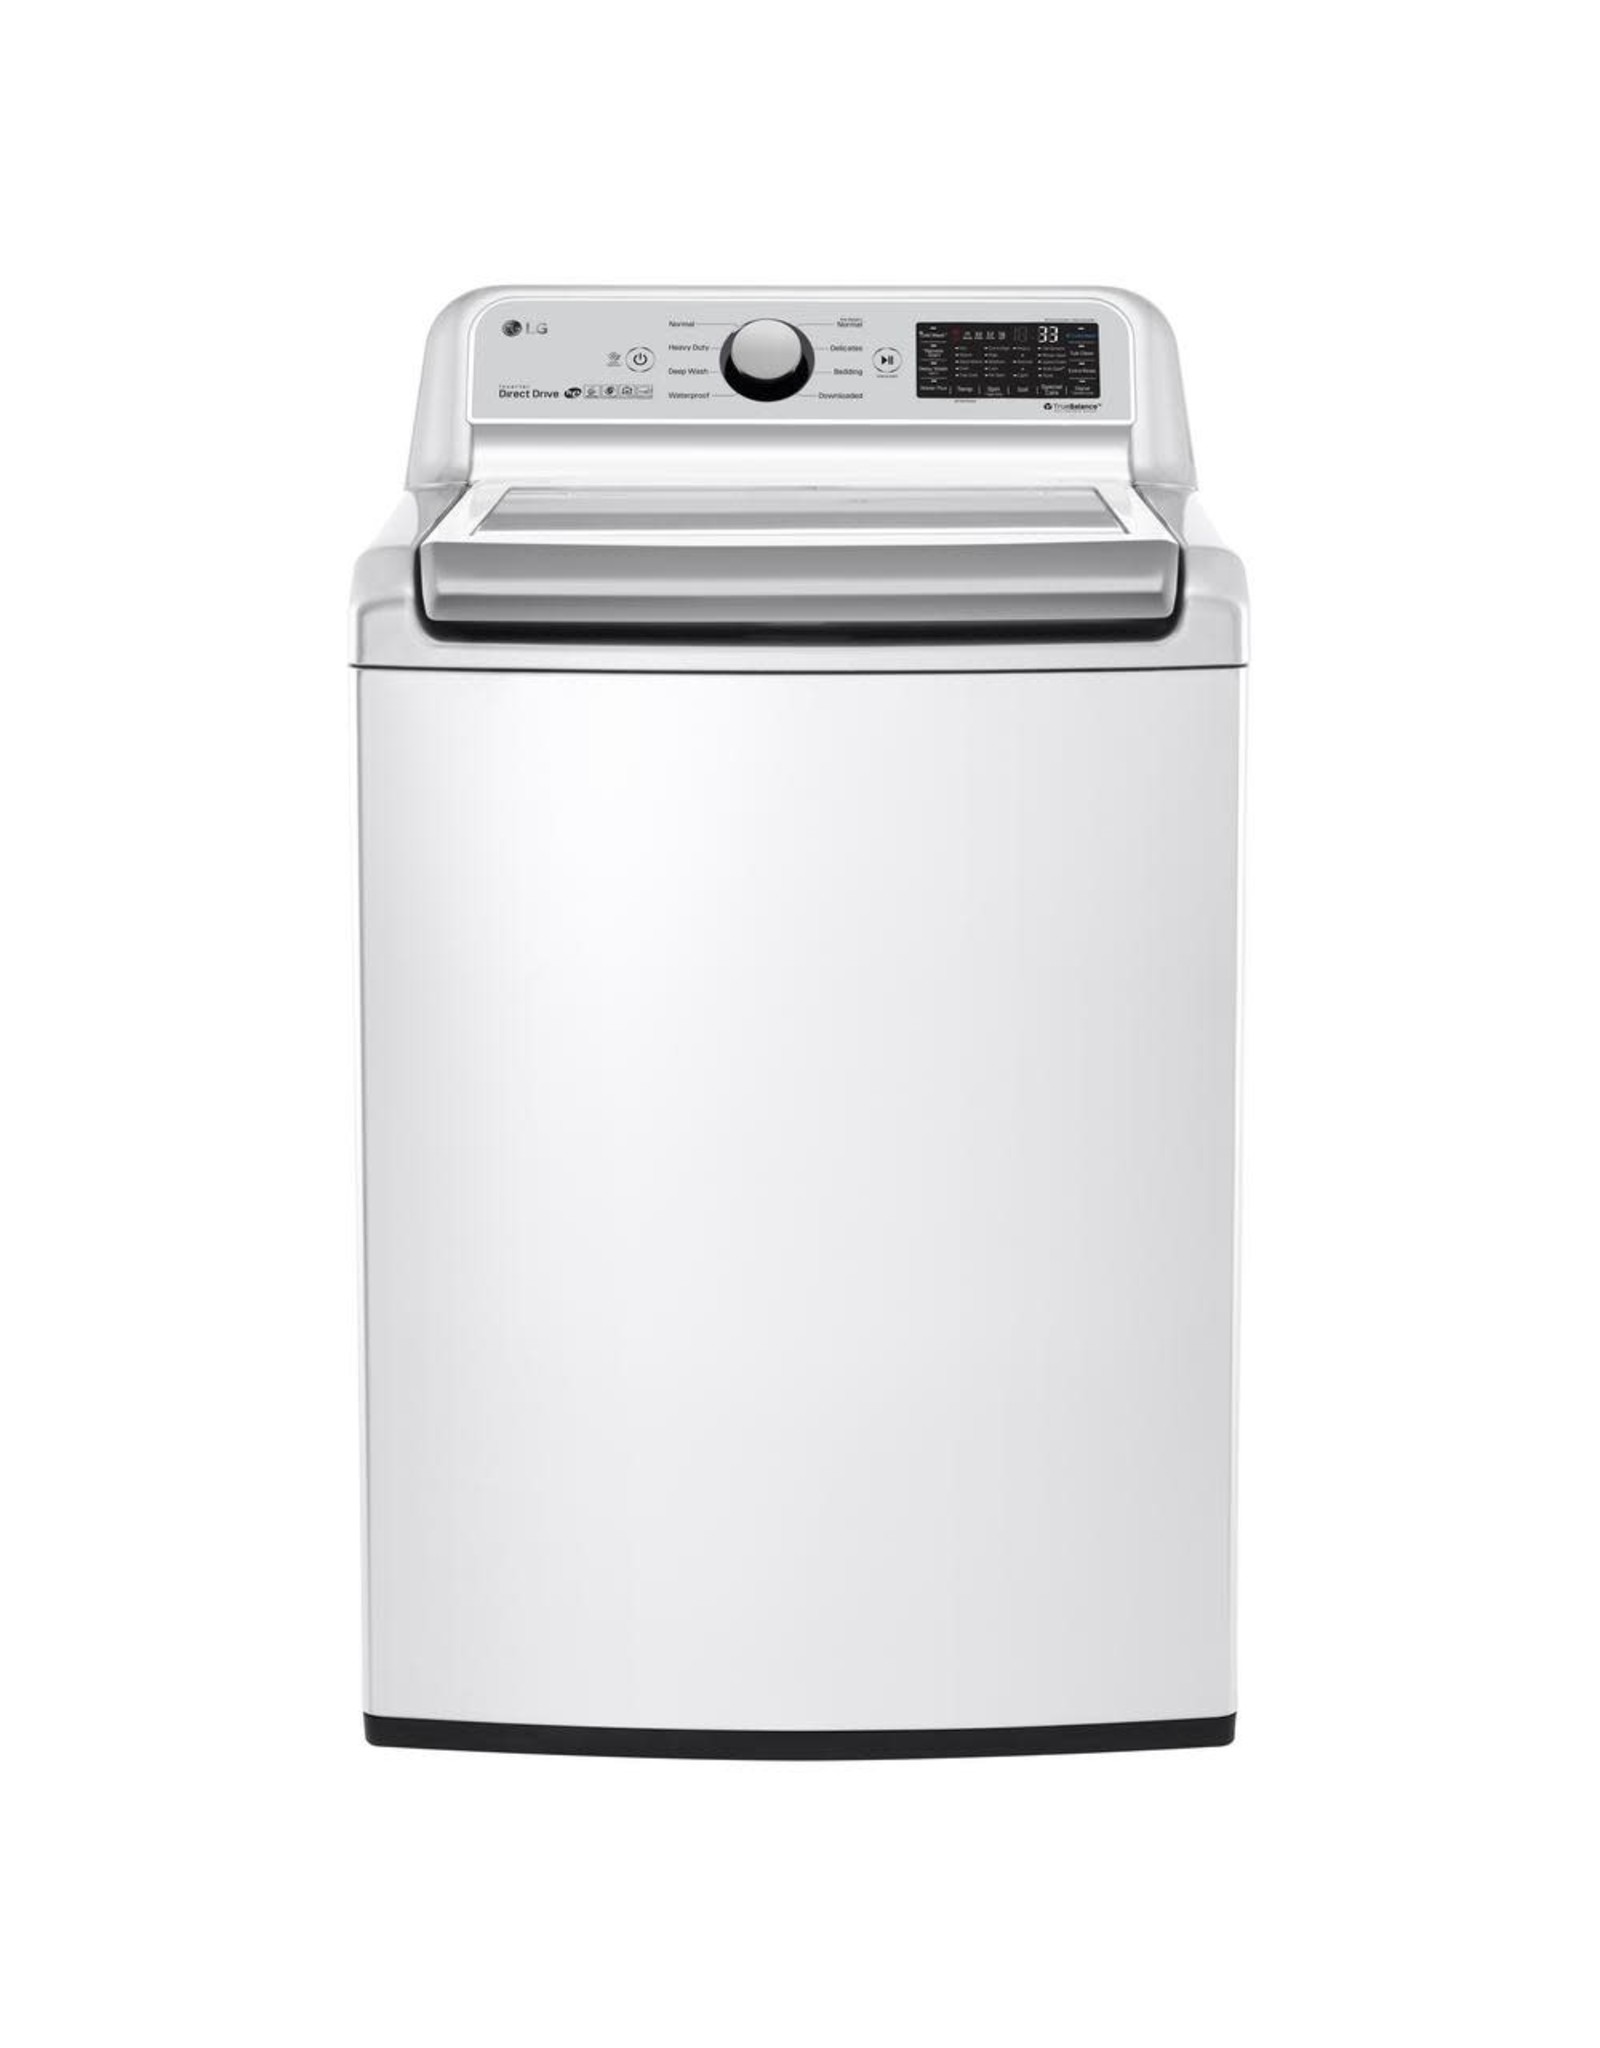 WT7300CW  5.0 cu. ft. High Efficiency Mega Capacity Smart Top Load Washer with TurboWash3D and Wi-Fi Enabled in White, ENERGY STAR